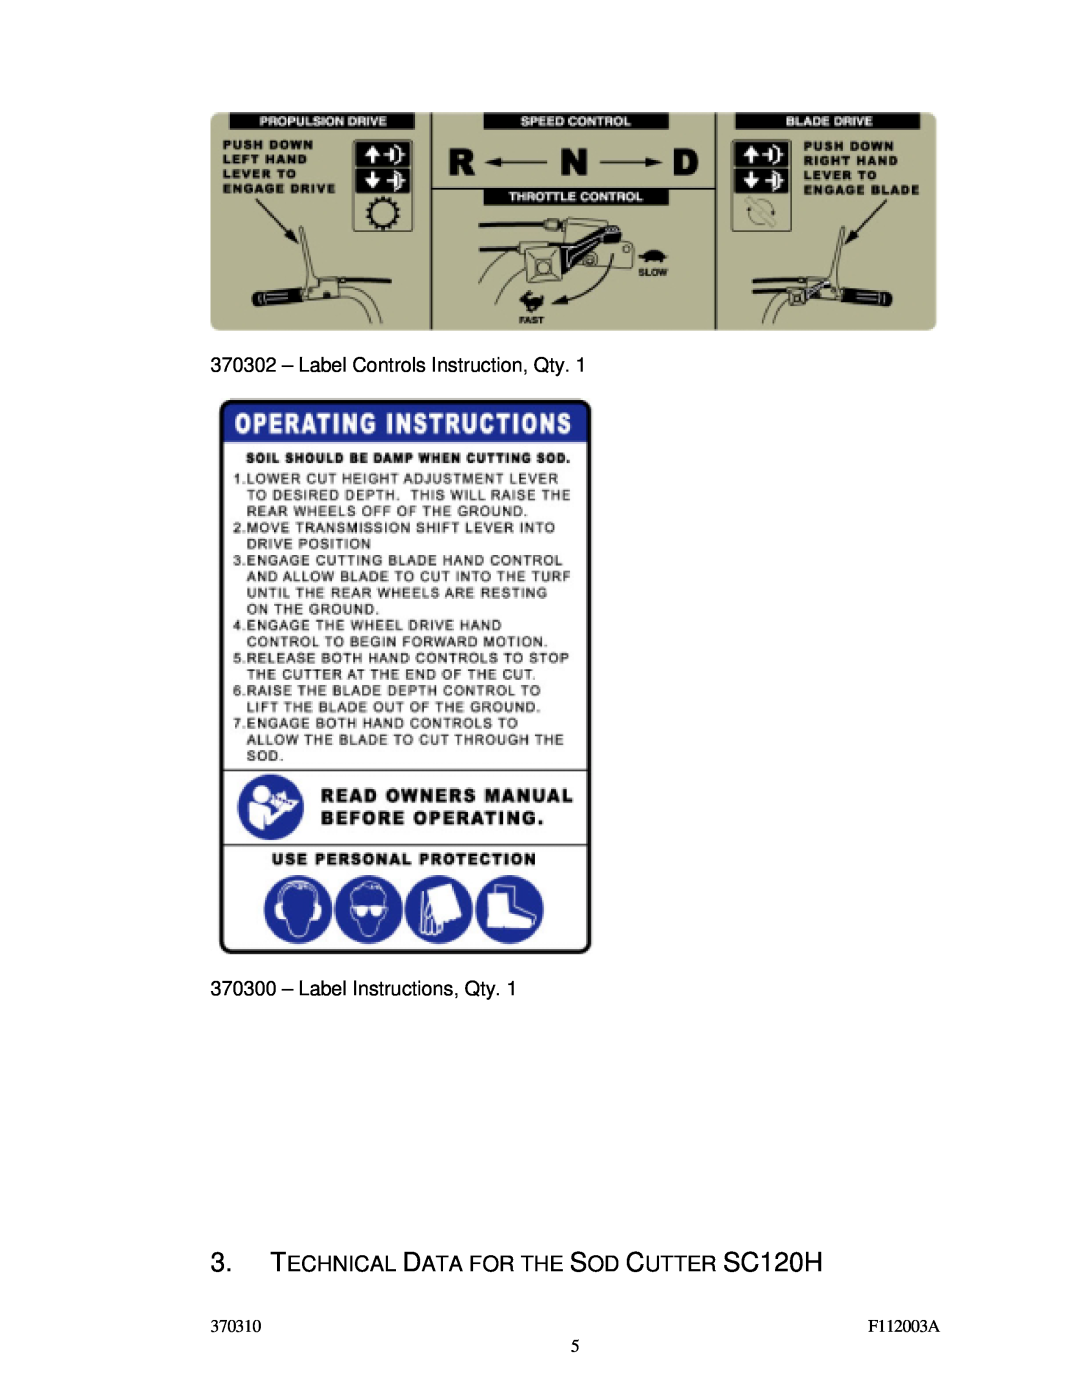 Billy Goat TECHNICAL DATA FOR THE SOD CUTTER SC120H, 370302 – Label Controls Instruction, Qty, 370310, F112003A 